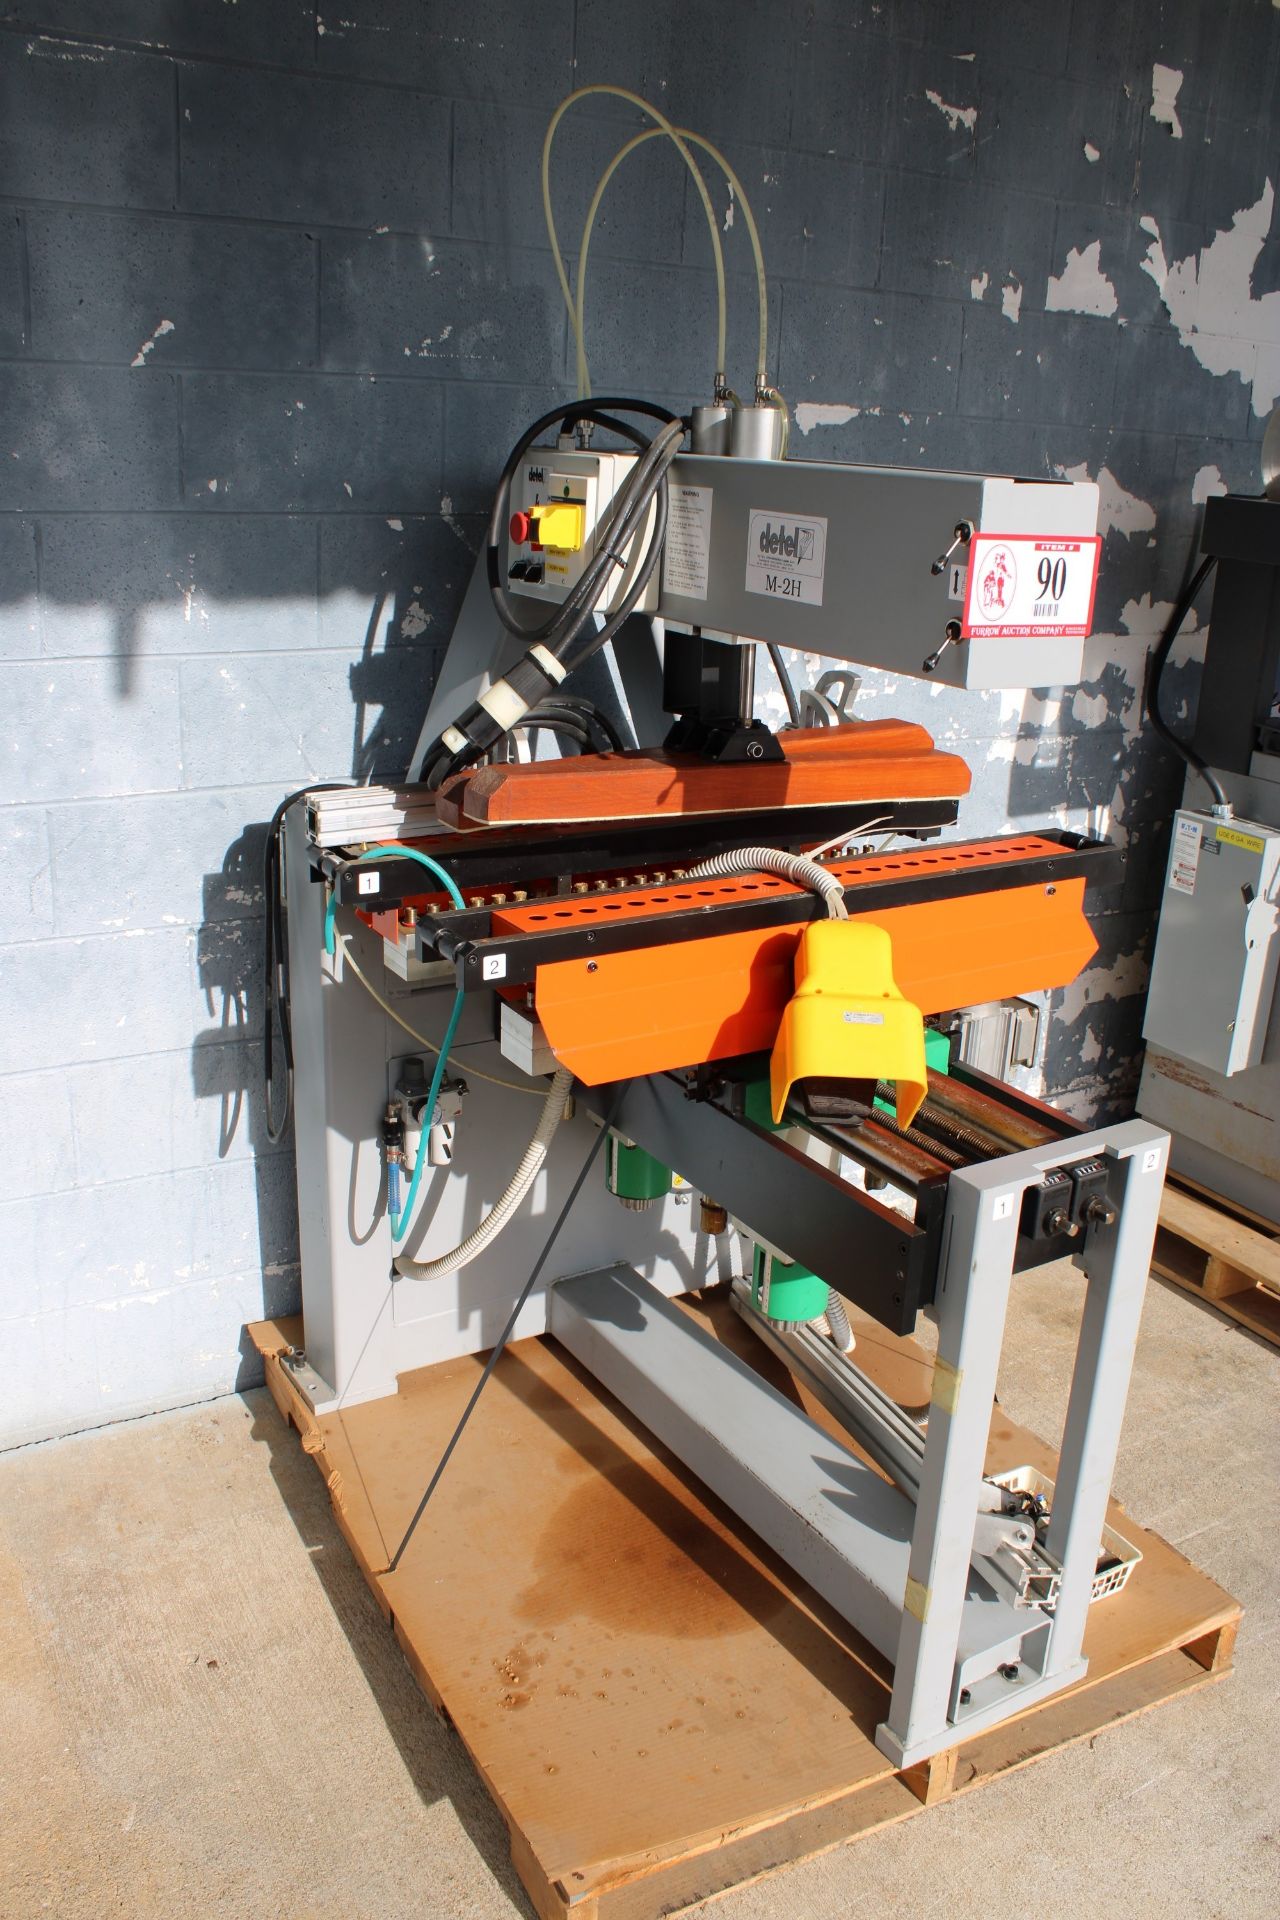 Adwood Detel M-2H-M 35 Double Boring Machine Press, 230v 3 Phase, Purchased New and Used Less Than - Image 2 of 2